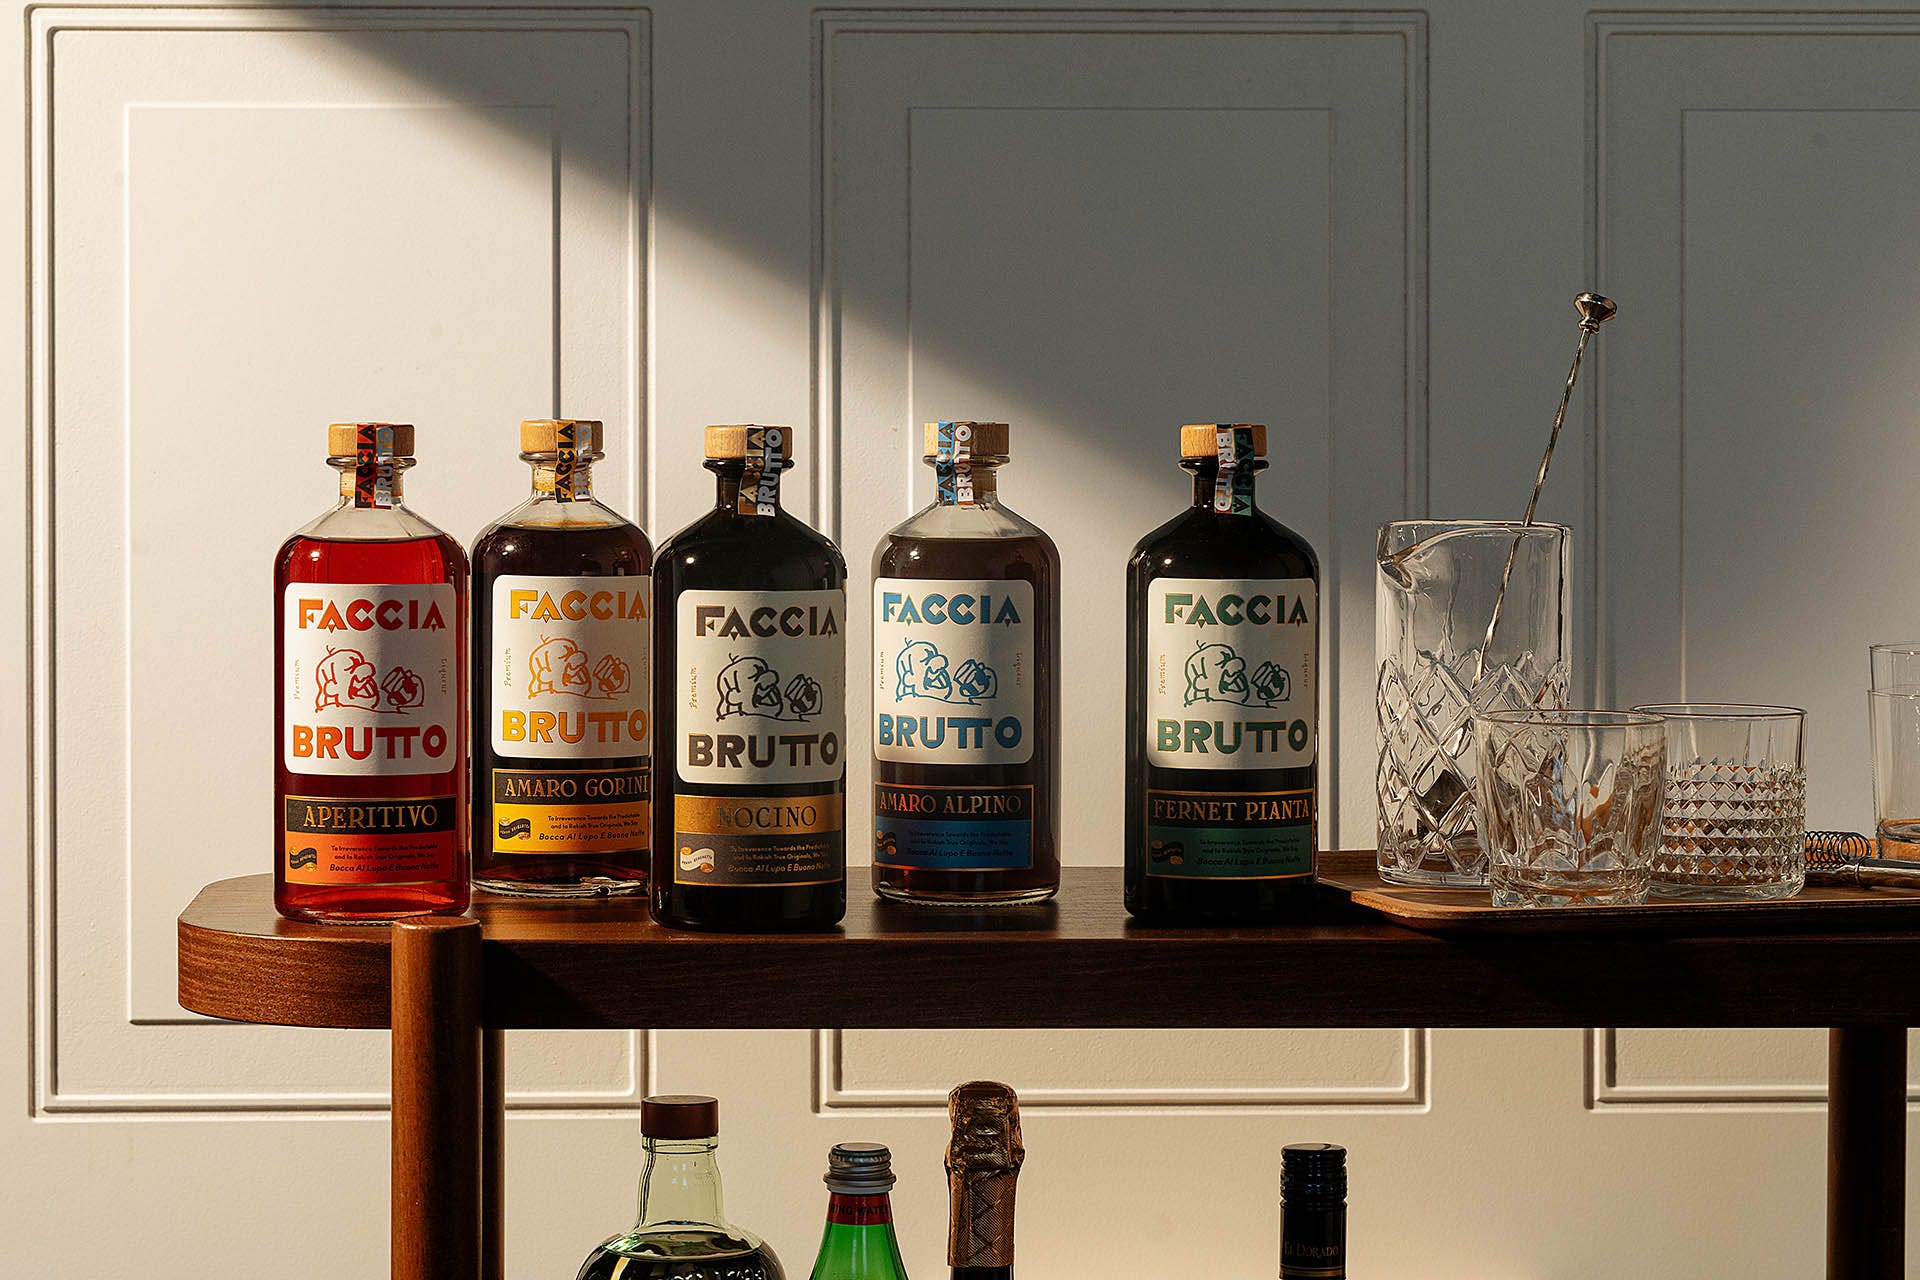 Faccia Brutto's lineup of amaros and other liqueurs